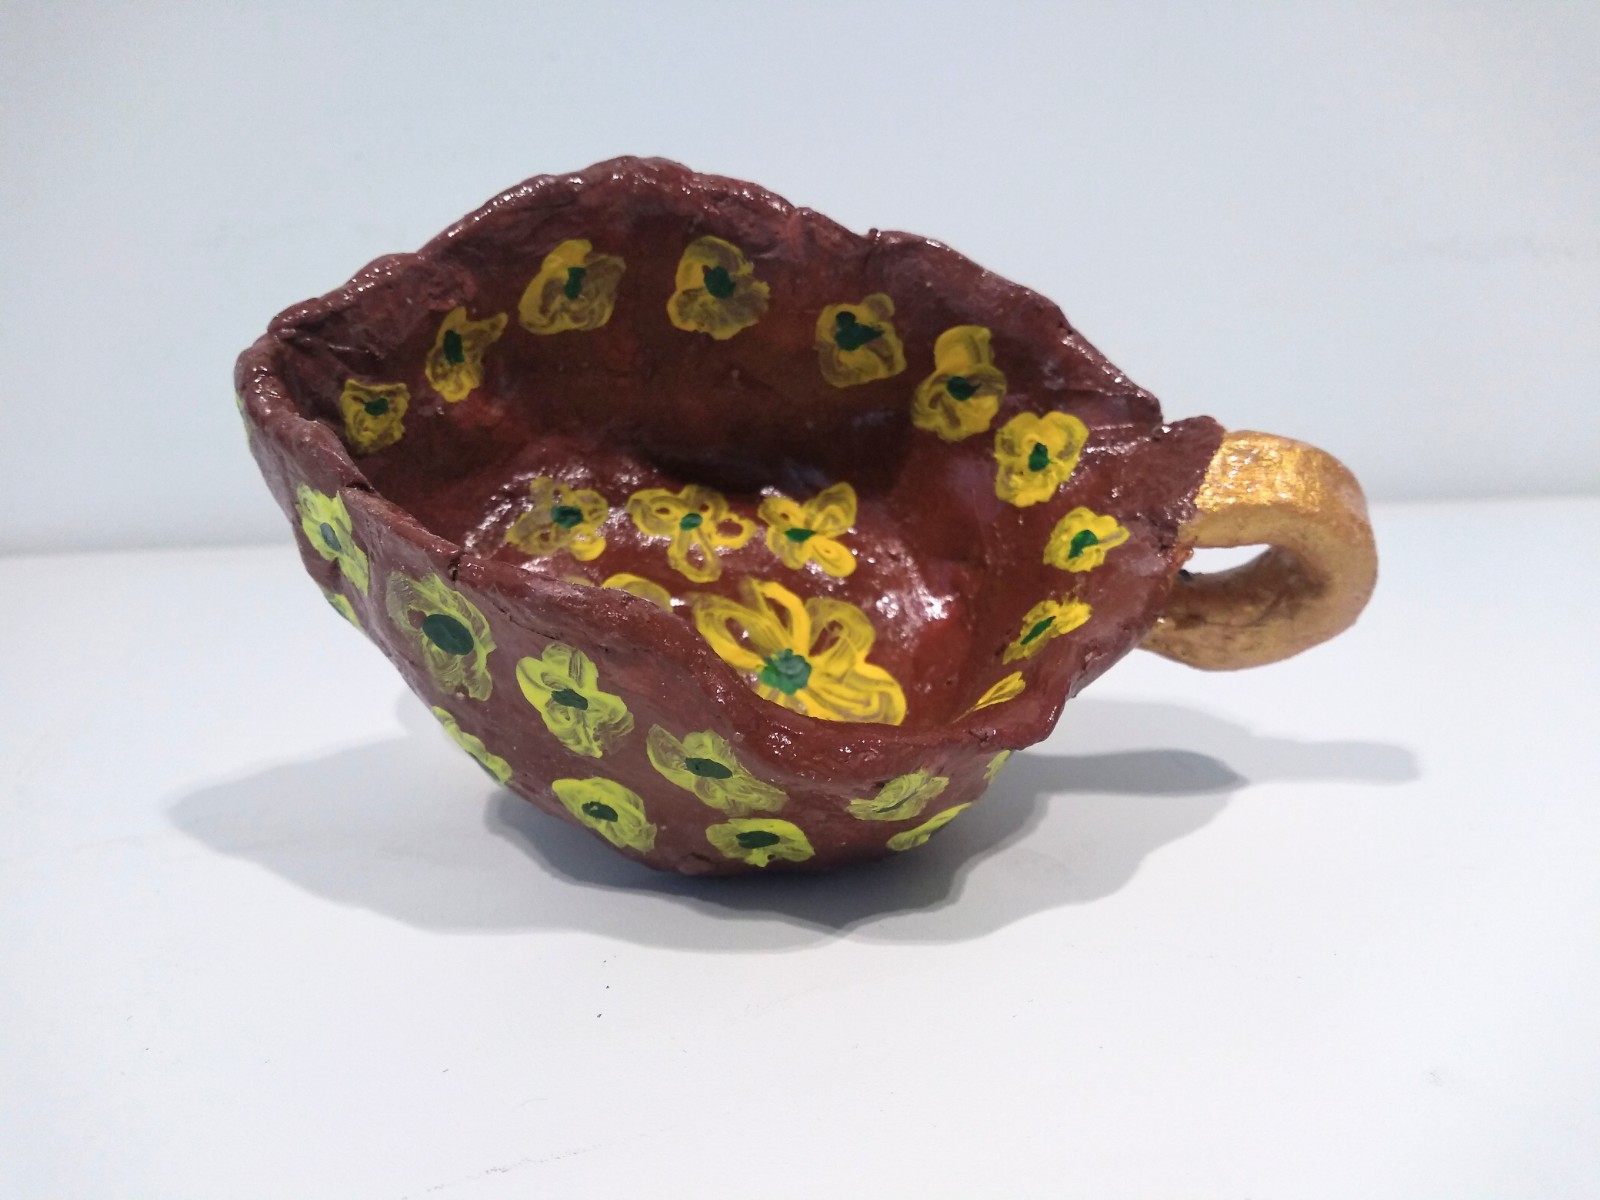 Maroon clay pot with yellow flowers and gold handle.